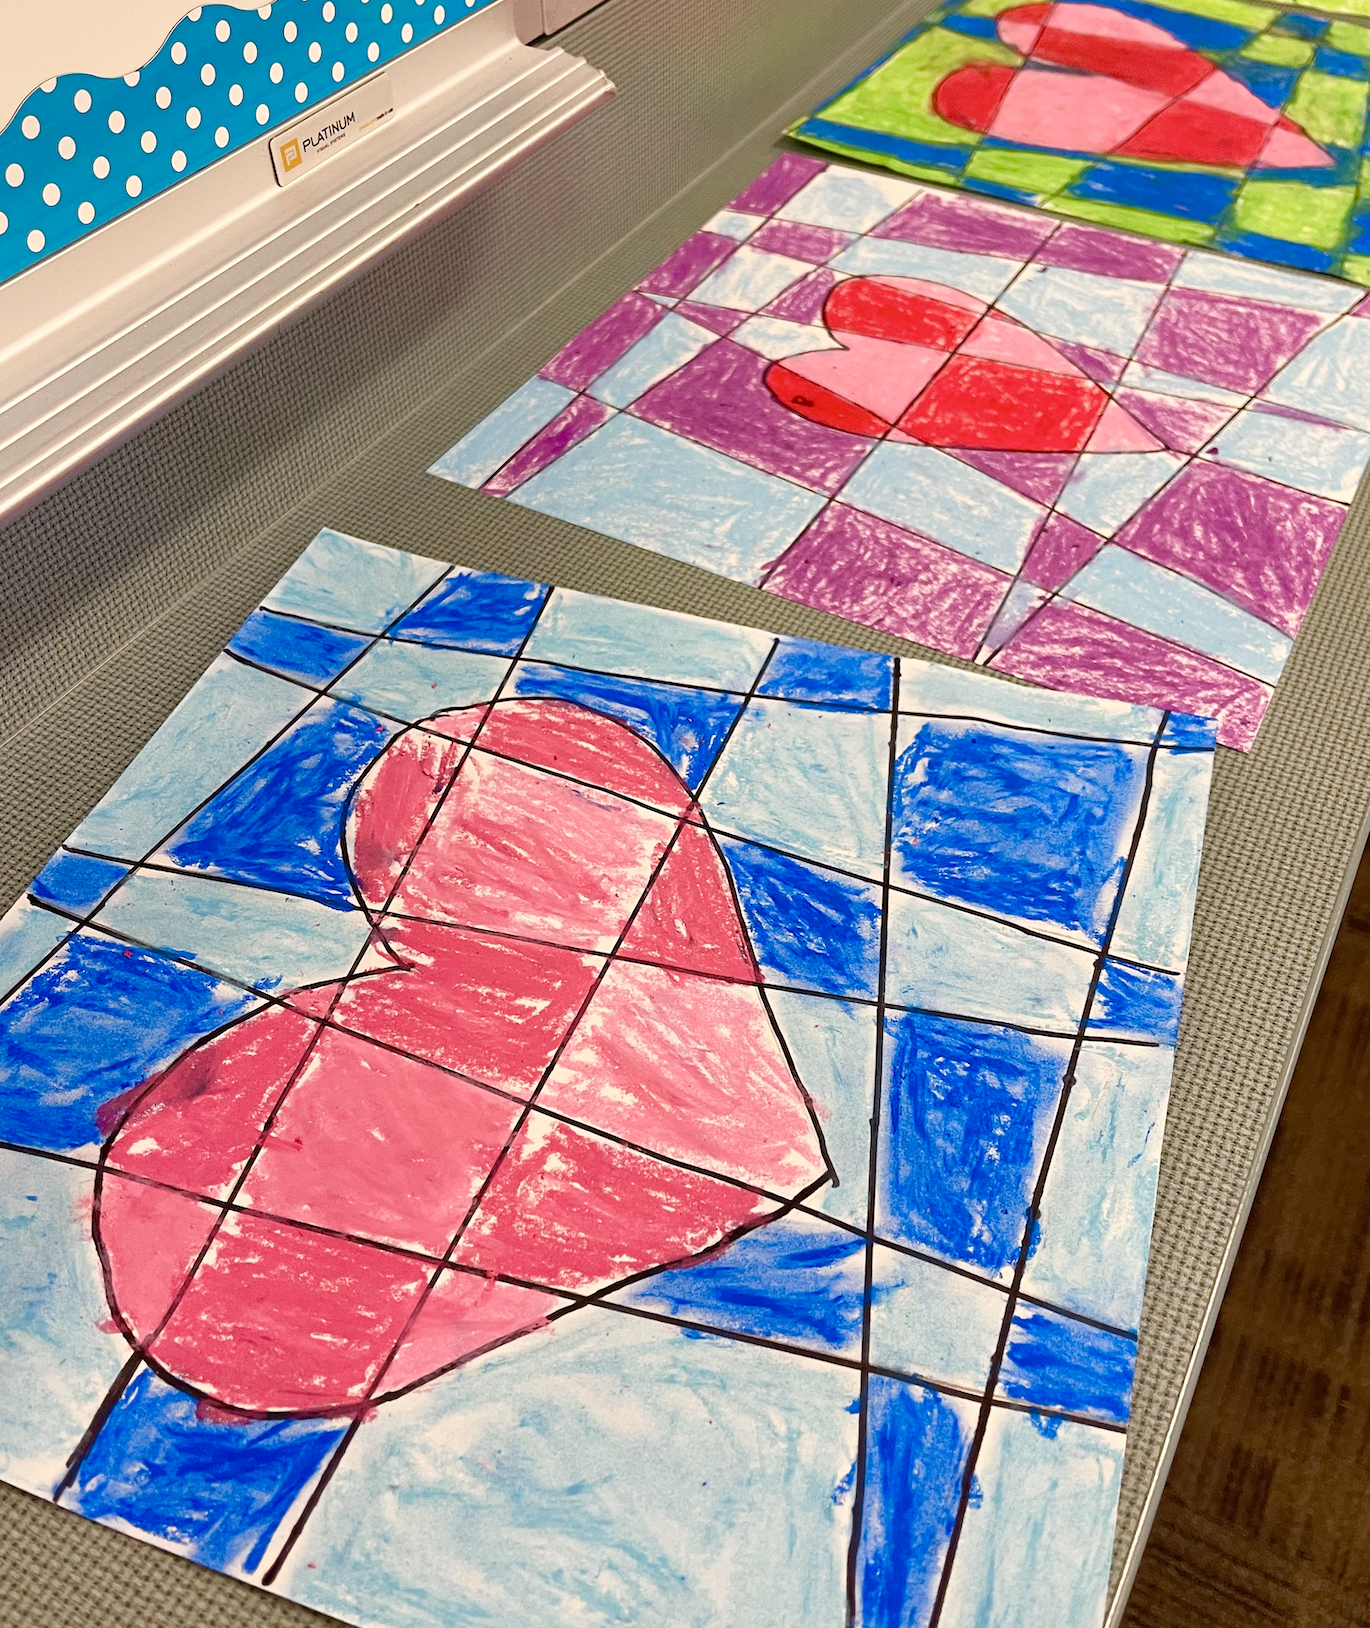 valentine's day art projects completed by students